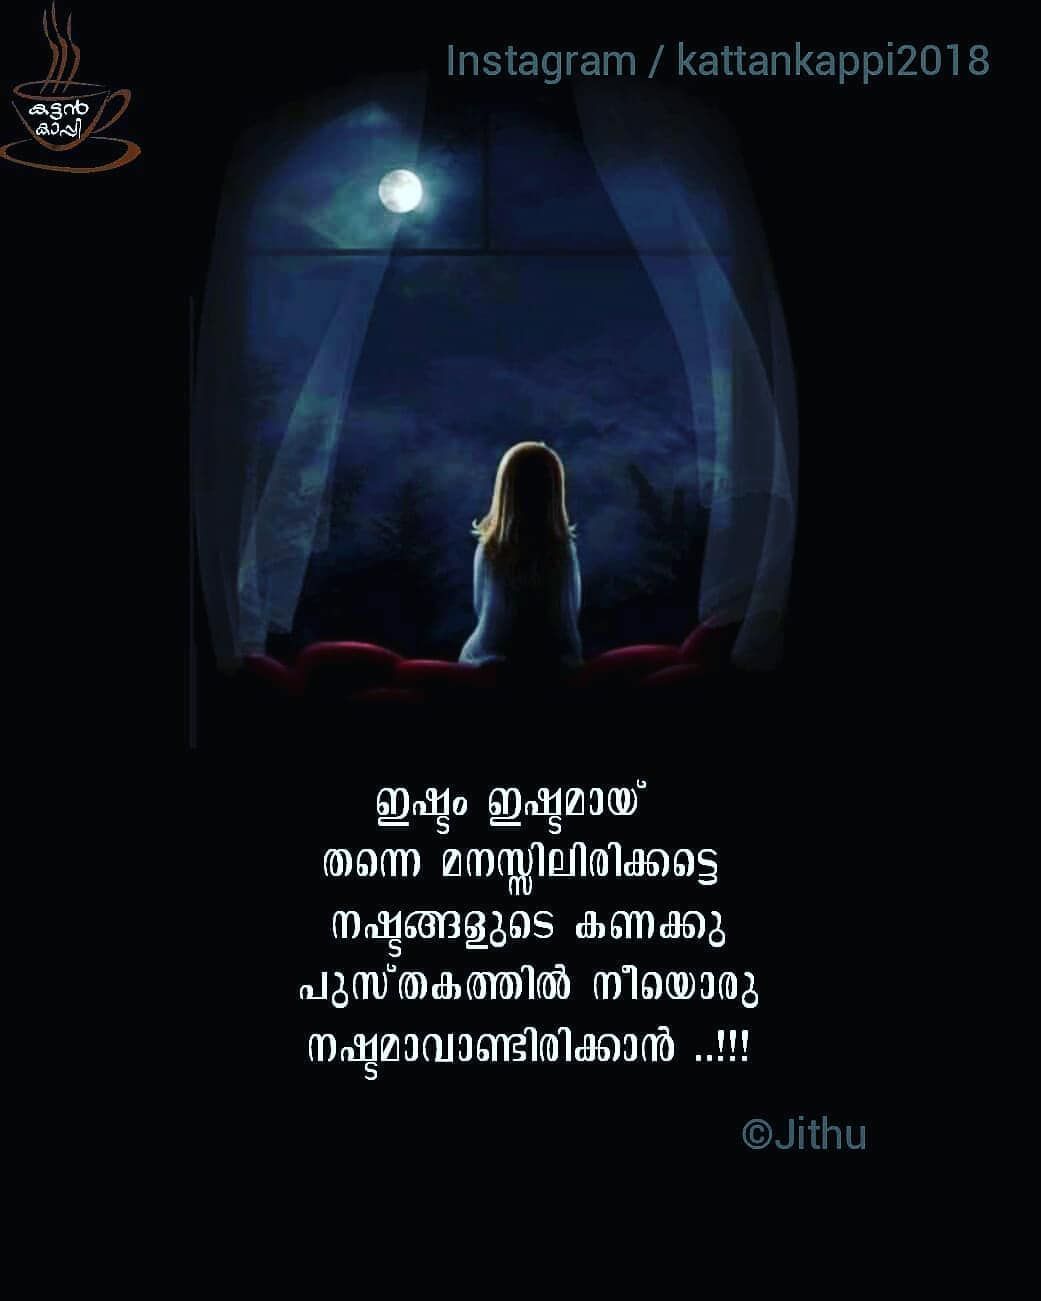 Kattankappi2018 Sad Missing Quotes Malayalam 1407411 Hd Wallpaper Backgrounds Download Sometimes life gives you lemons and you don't have the energy to make lemonade. sad missing quotes malayalam